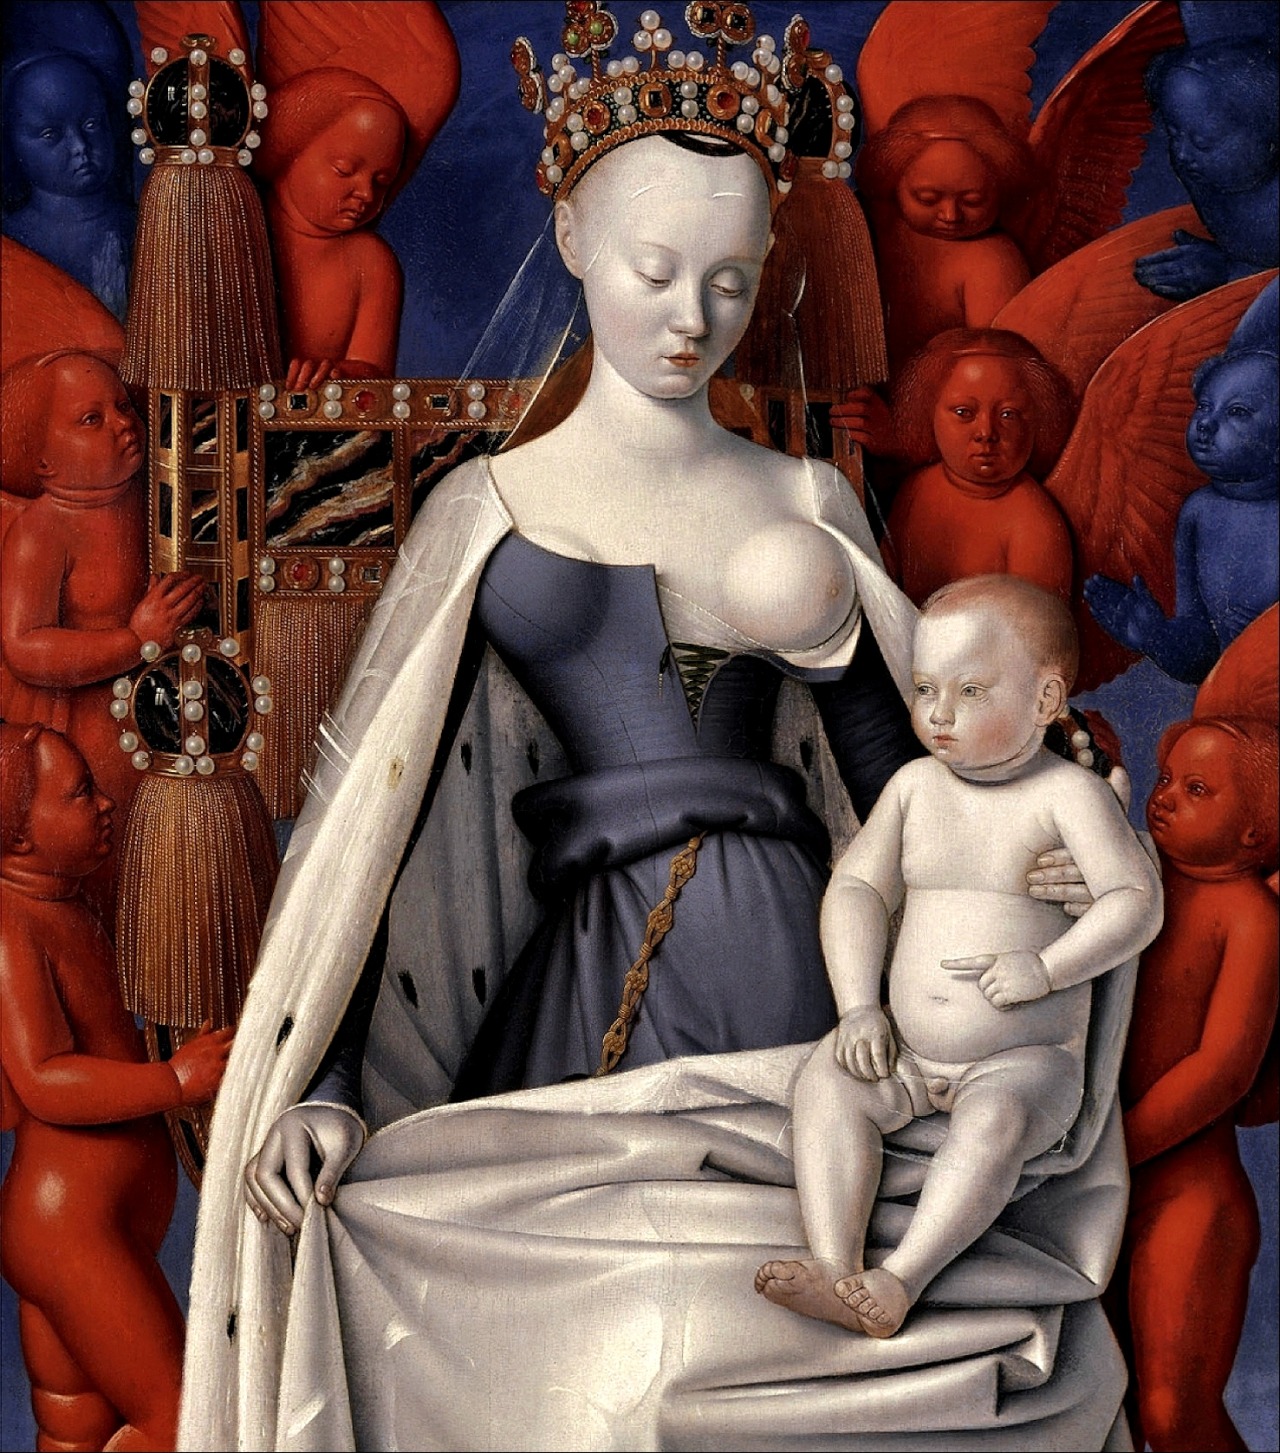 Jean (or Jehan) Fouquet
[French Early Renaissance Painter, ca.1420-1477]
Madonna Surrounded by Seraphim and Cherubim, 1452
oil on oak wood, Height: 94.5 cm (37.2 in). Width: 85.5 cm (33.7 in). Depth: 1.2 cm (0.5 in).
Royal Museum of Fine Arts...